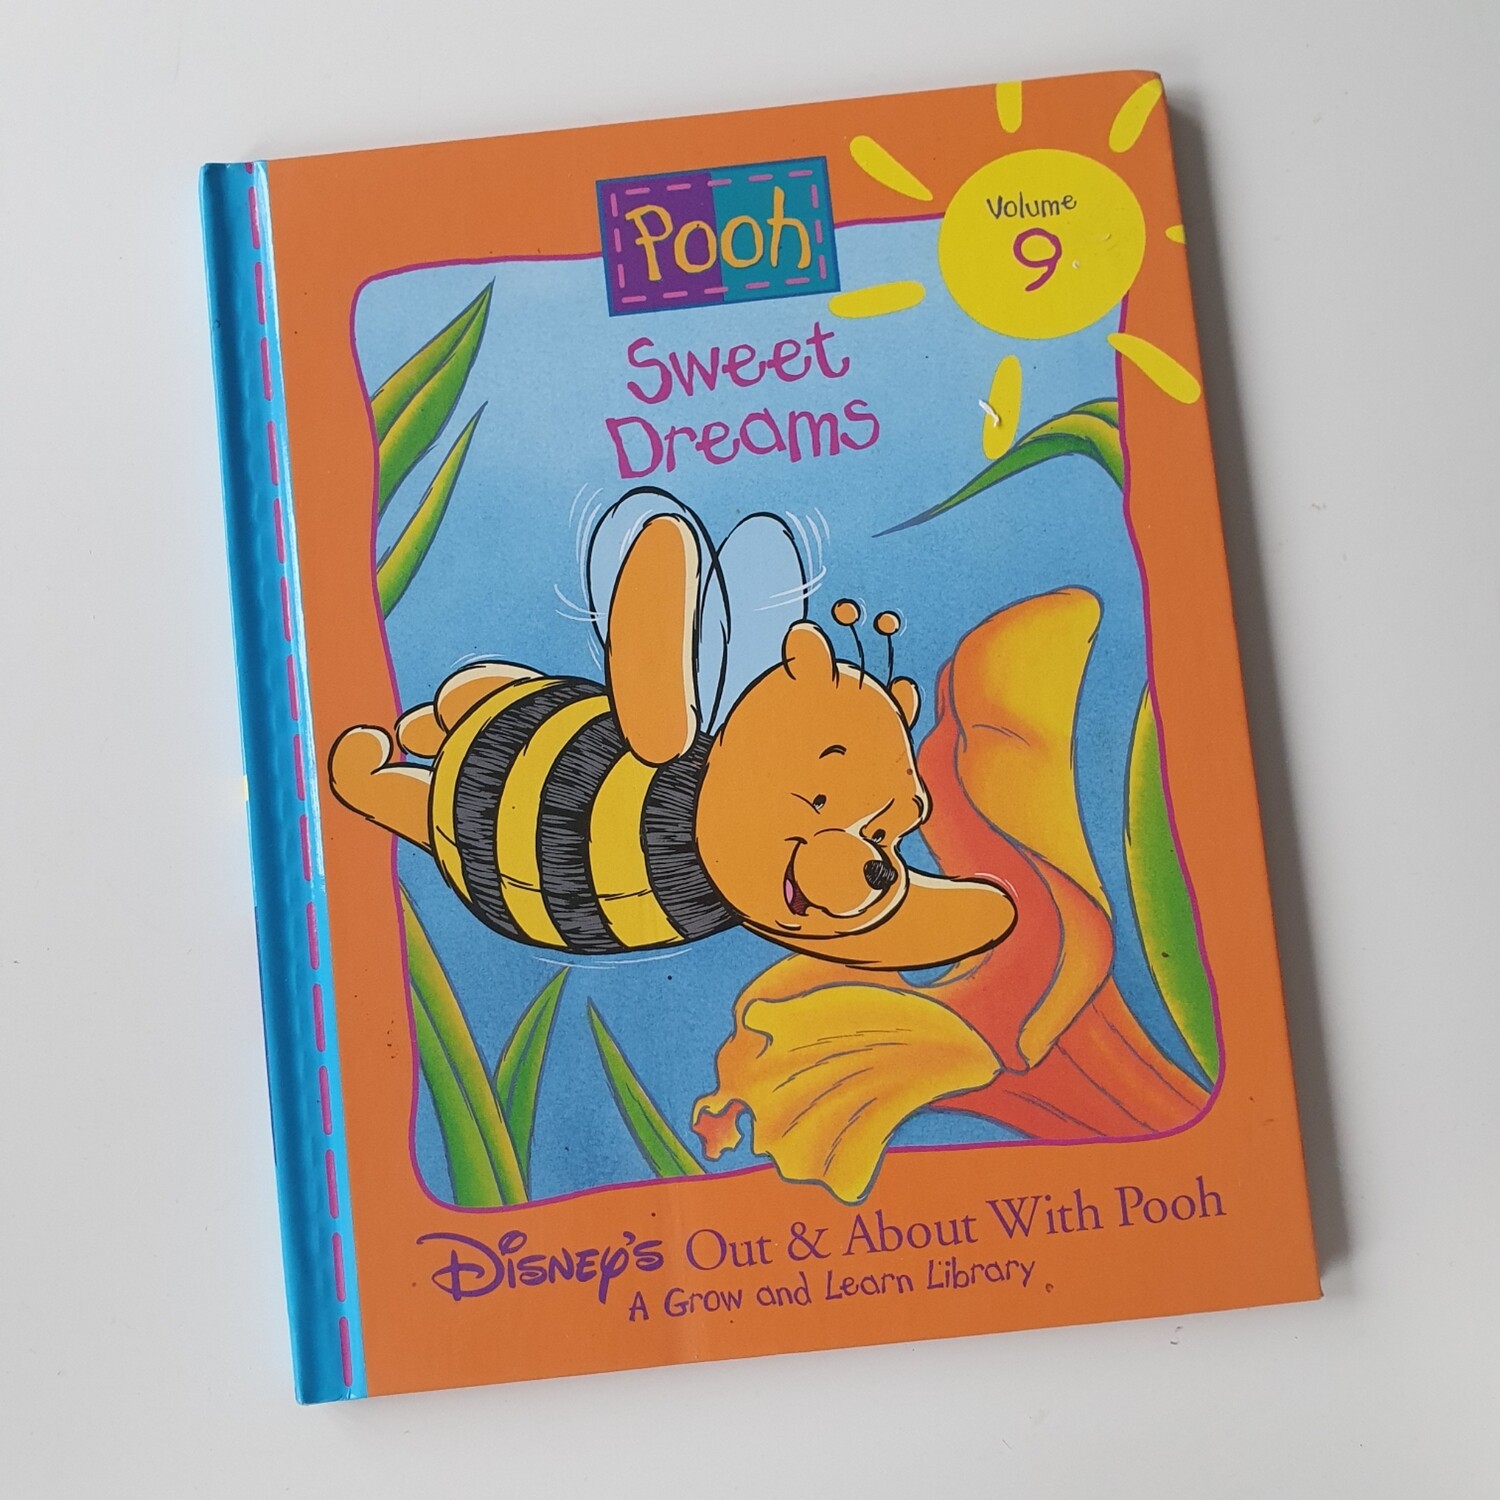 Winnie the Pooh Notebooks - choose from a selection